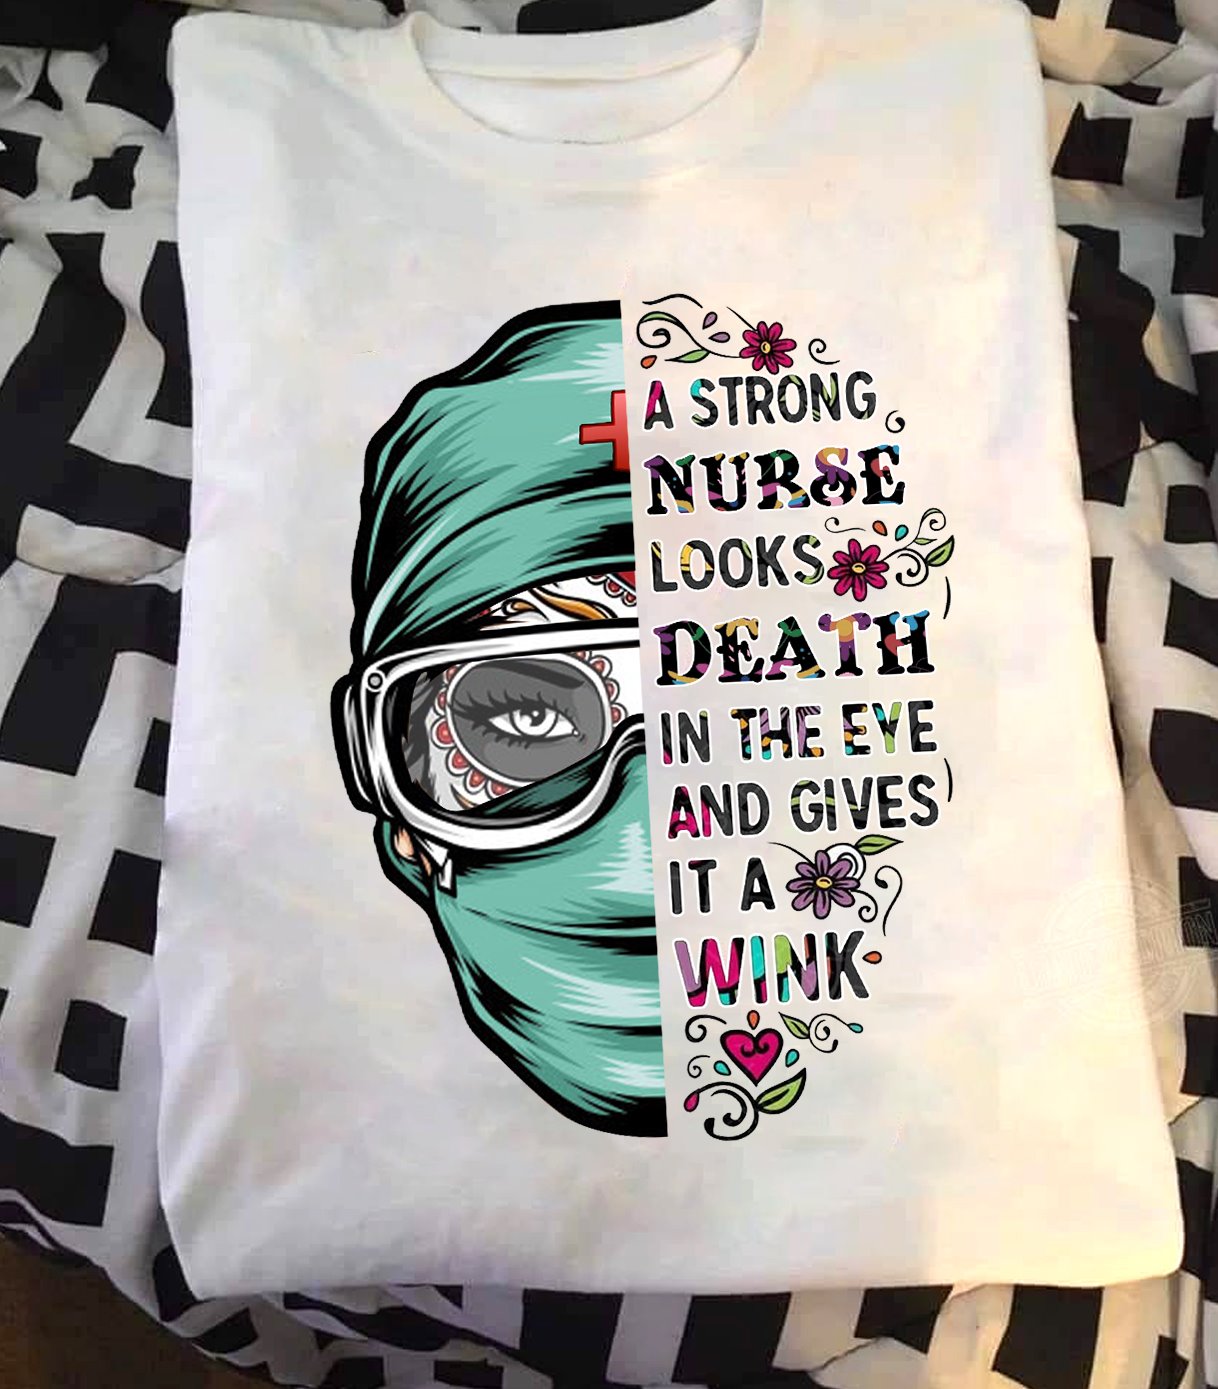 A strong nurse looks death in the eye and gives it a wink